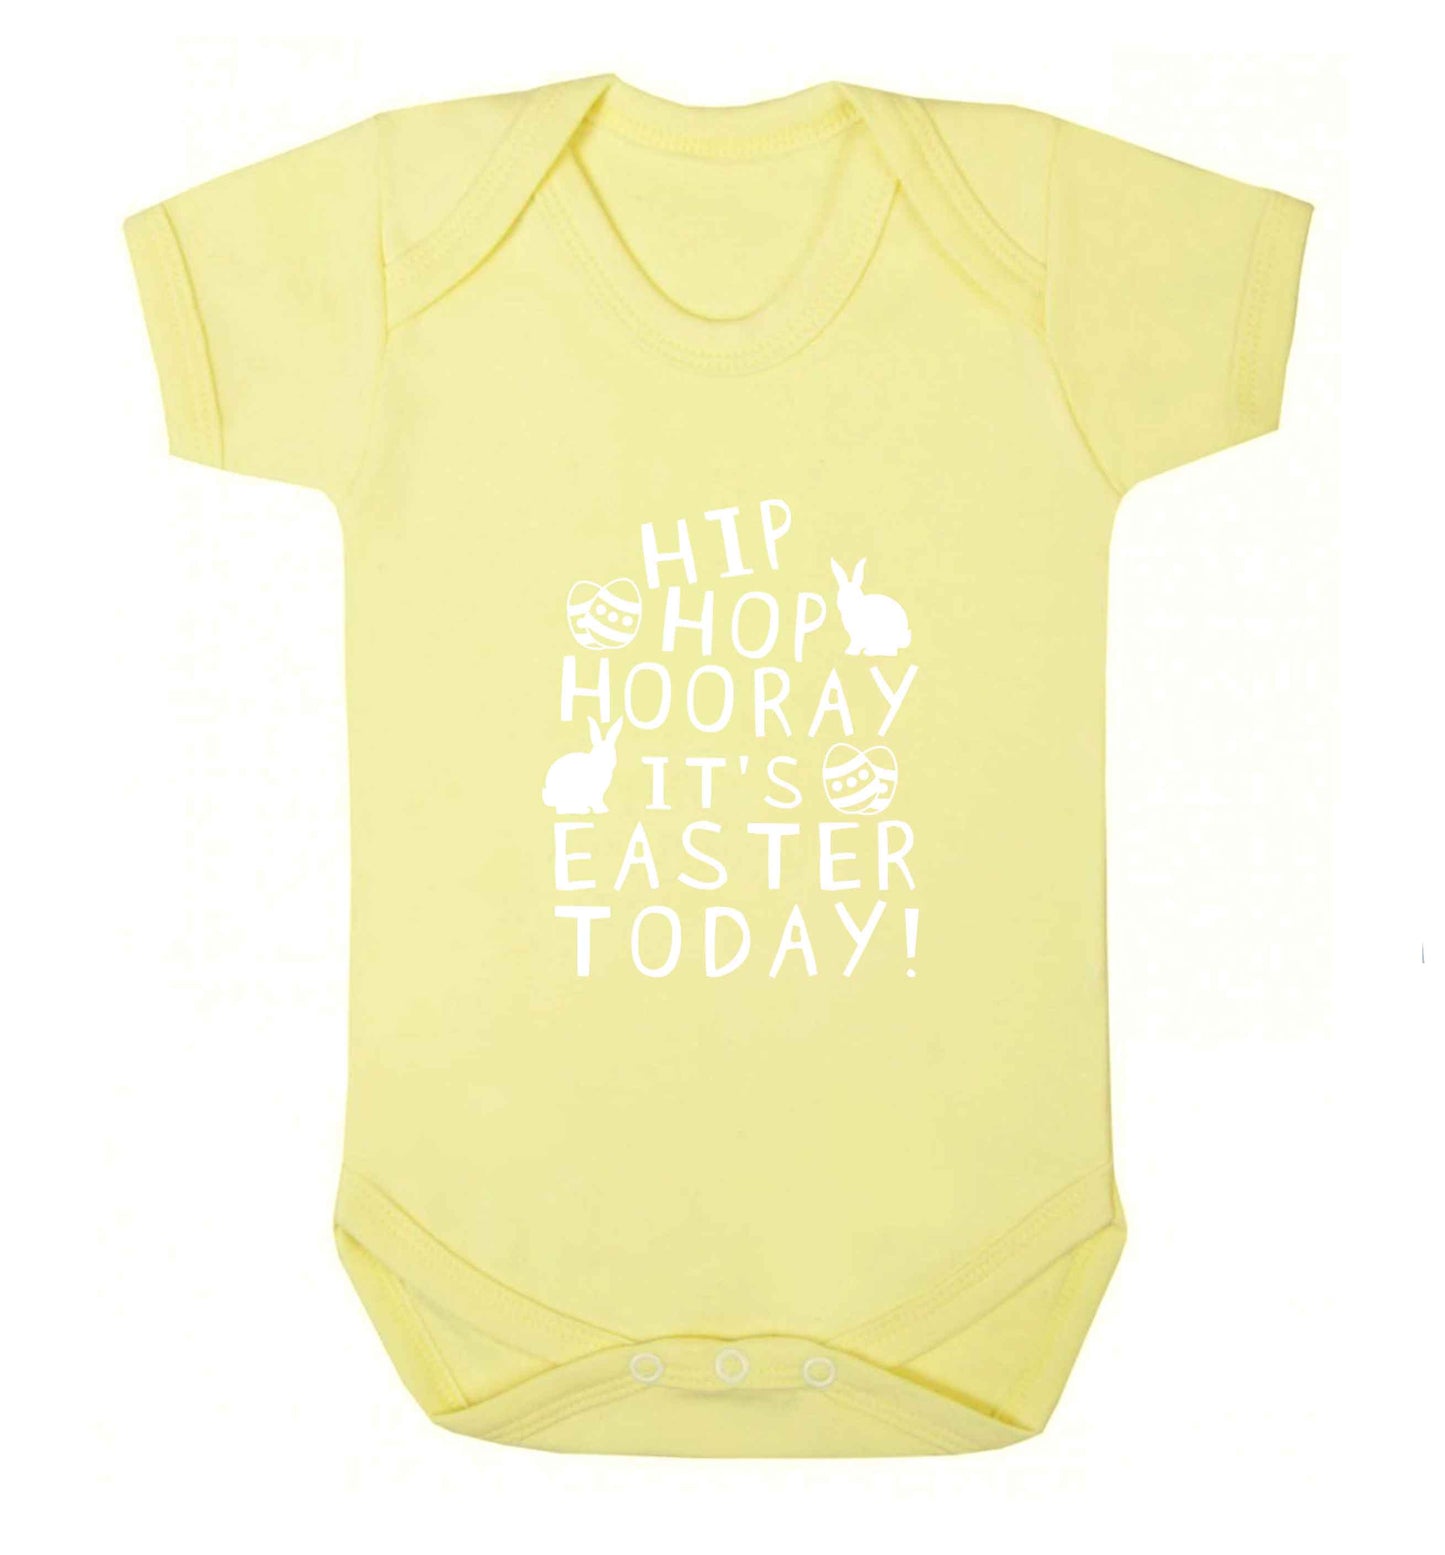 Hip hip hooray it's Easter today! baby vest pale yellow 18-24 months